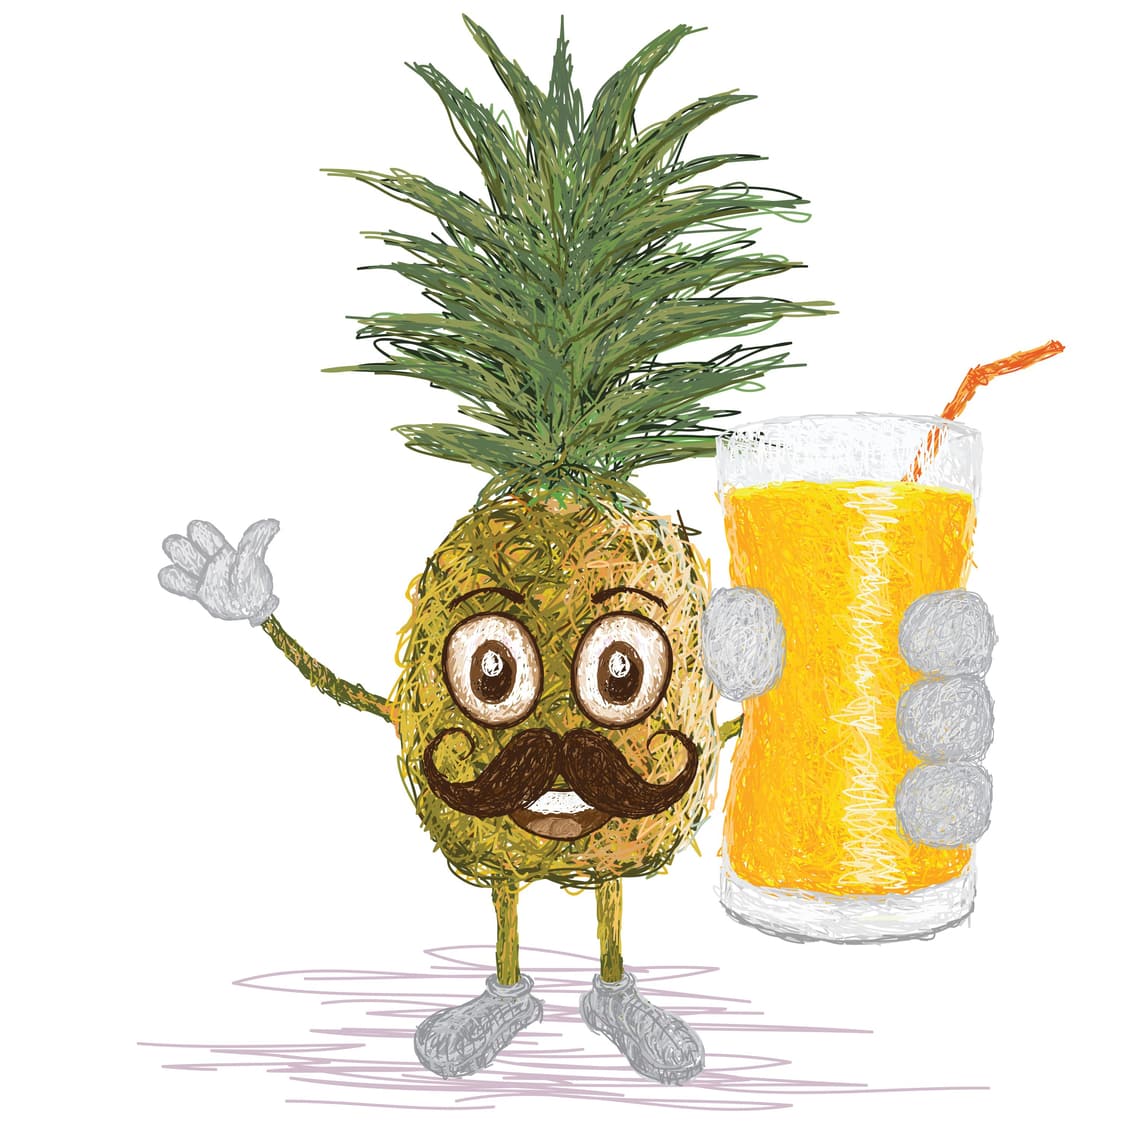 pineapple contains enzymes which help skin inflammation